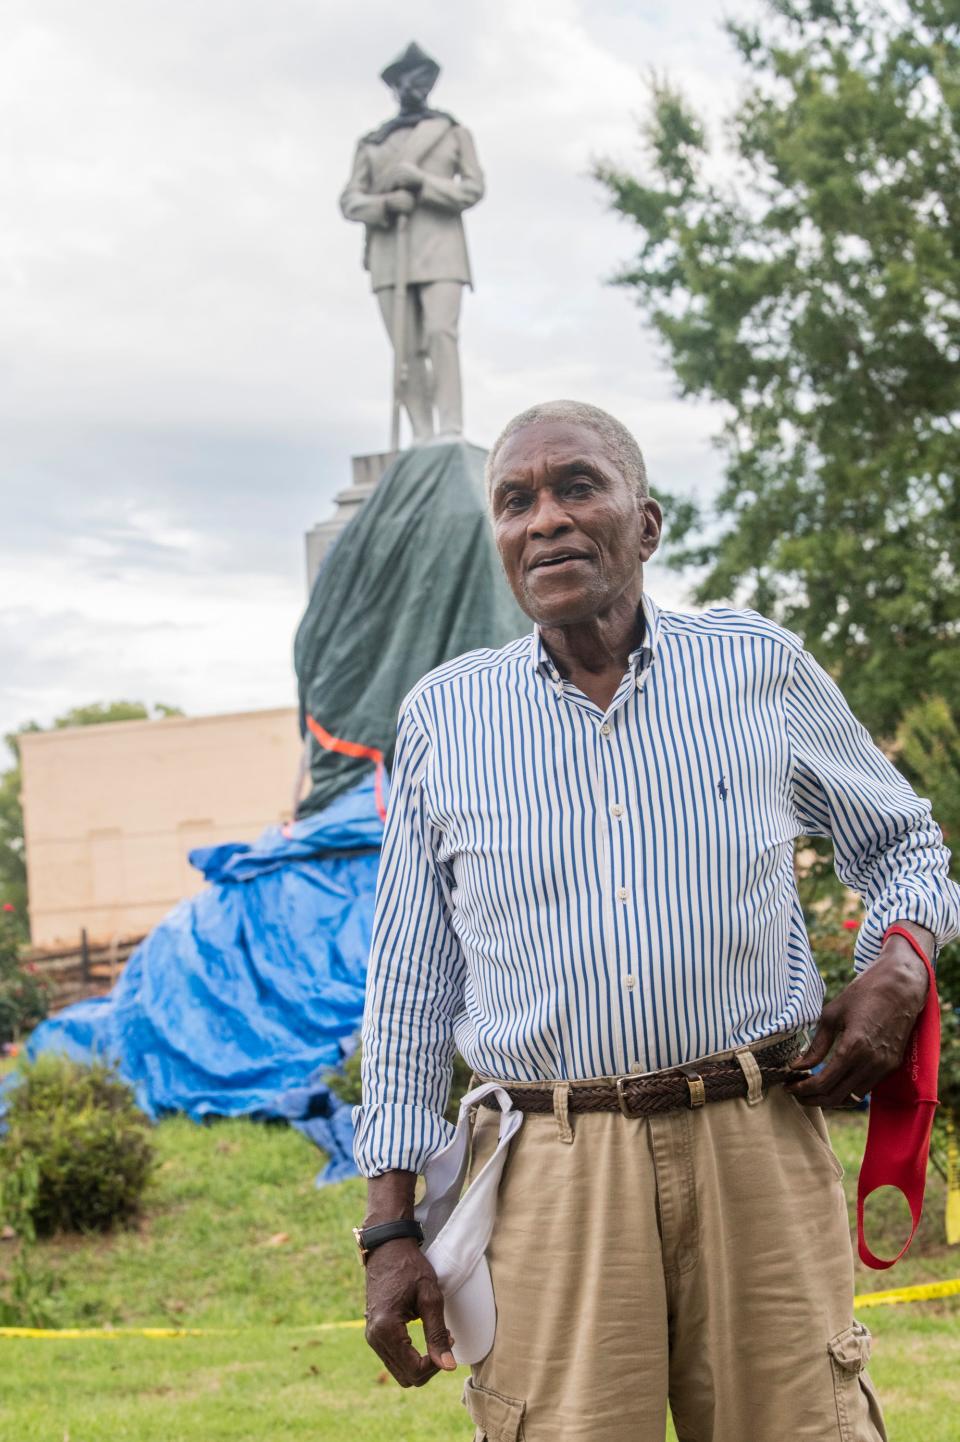 Former Mayor Johnny Ford stands in front of the Confederate monument he attempted to take down today before he was stopped by the sheriff in the town square in Tuskegee this past July.